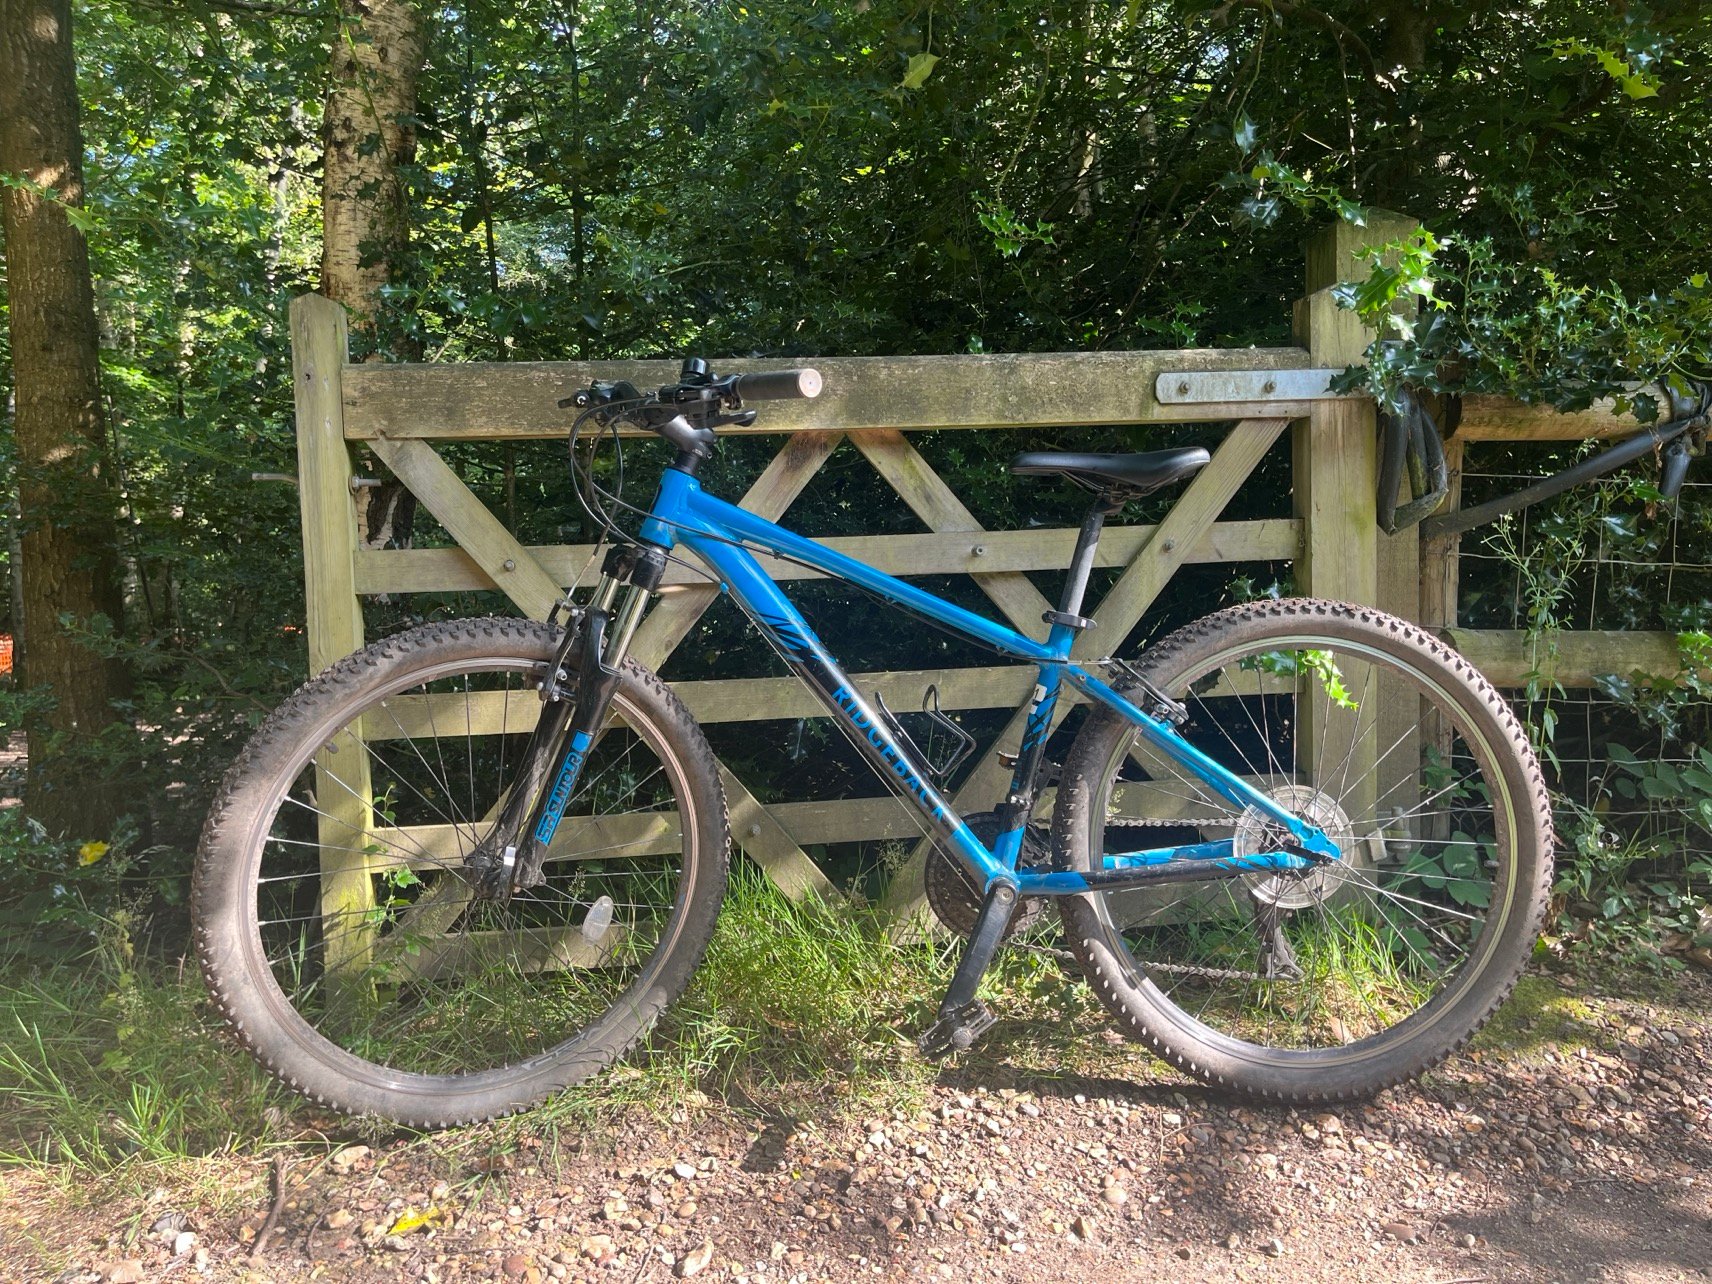 Small bike for hire at Go Ape Black Park